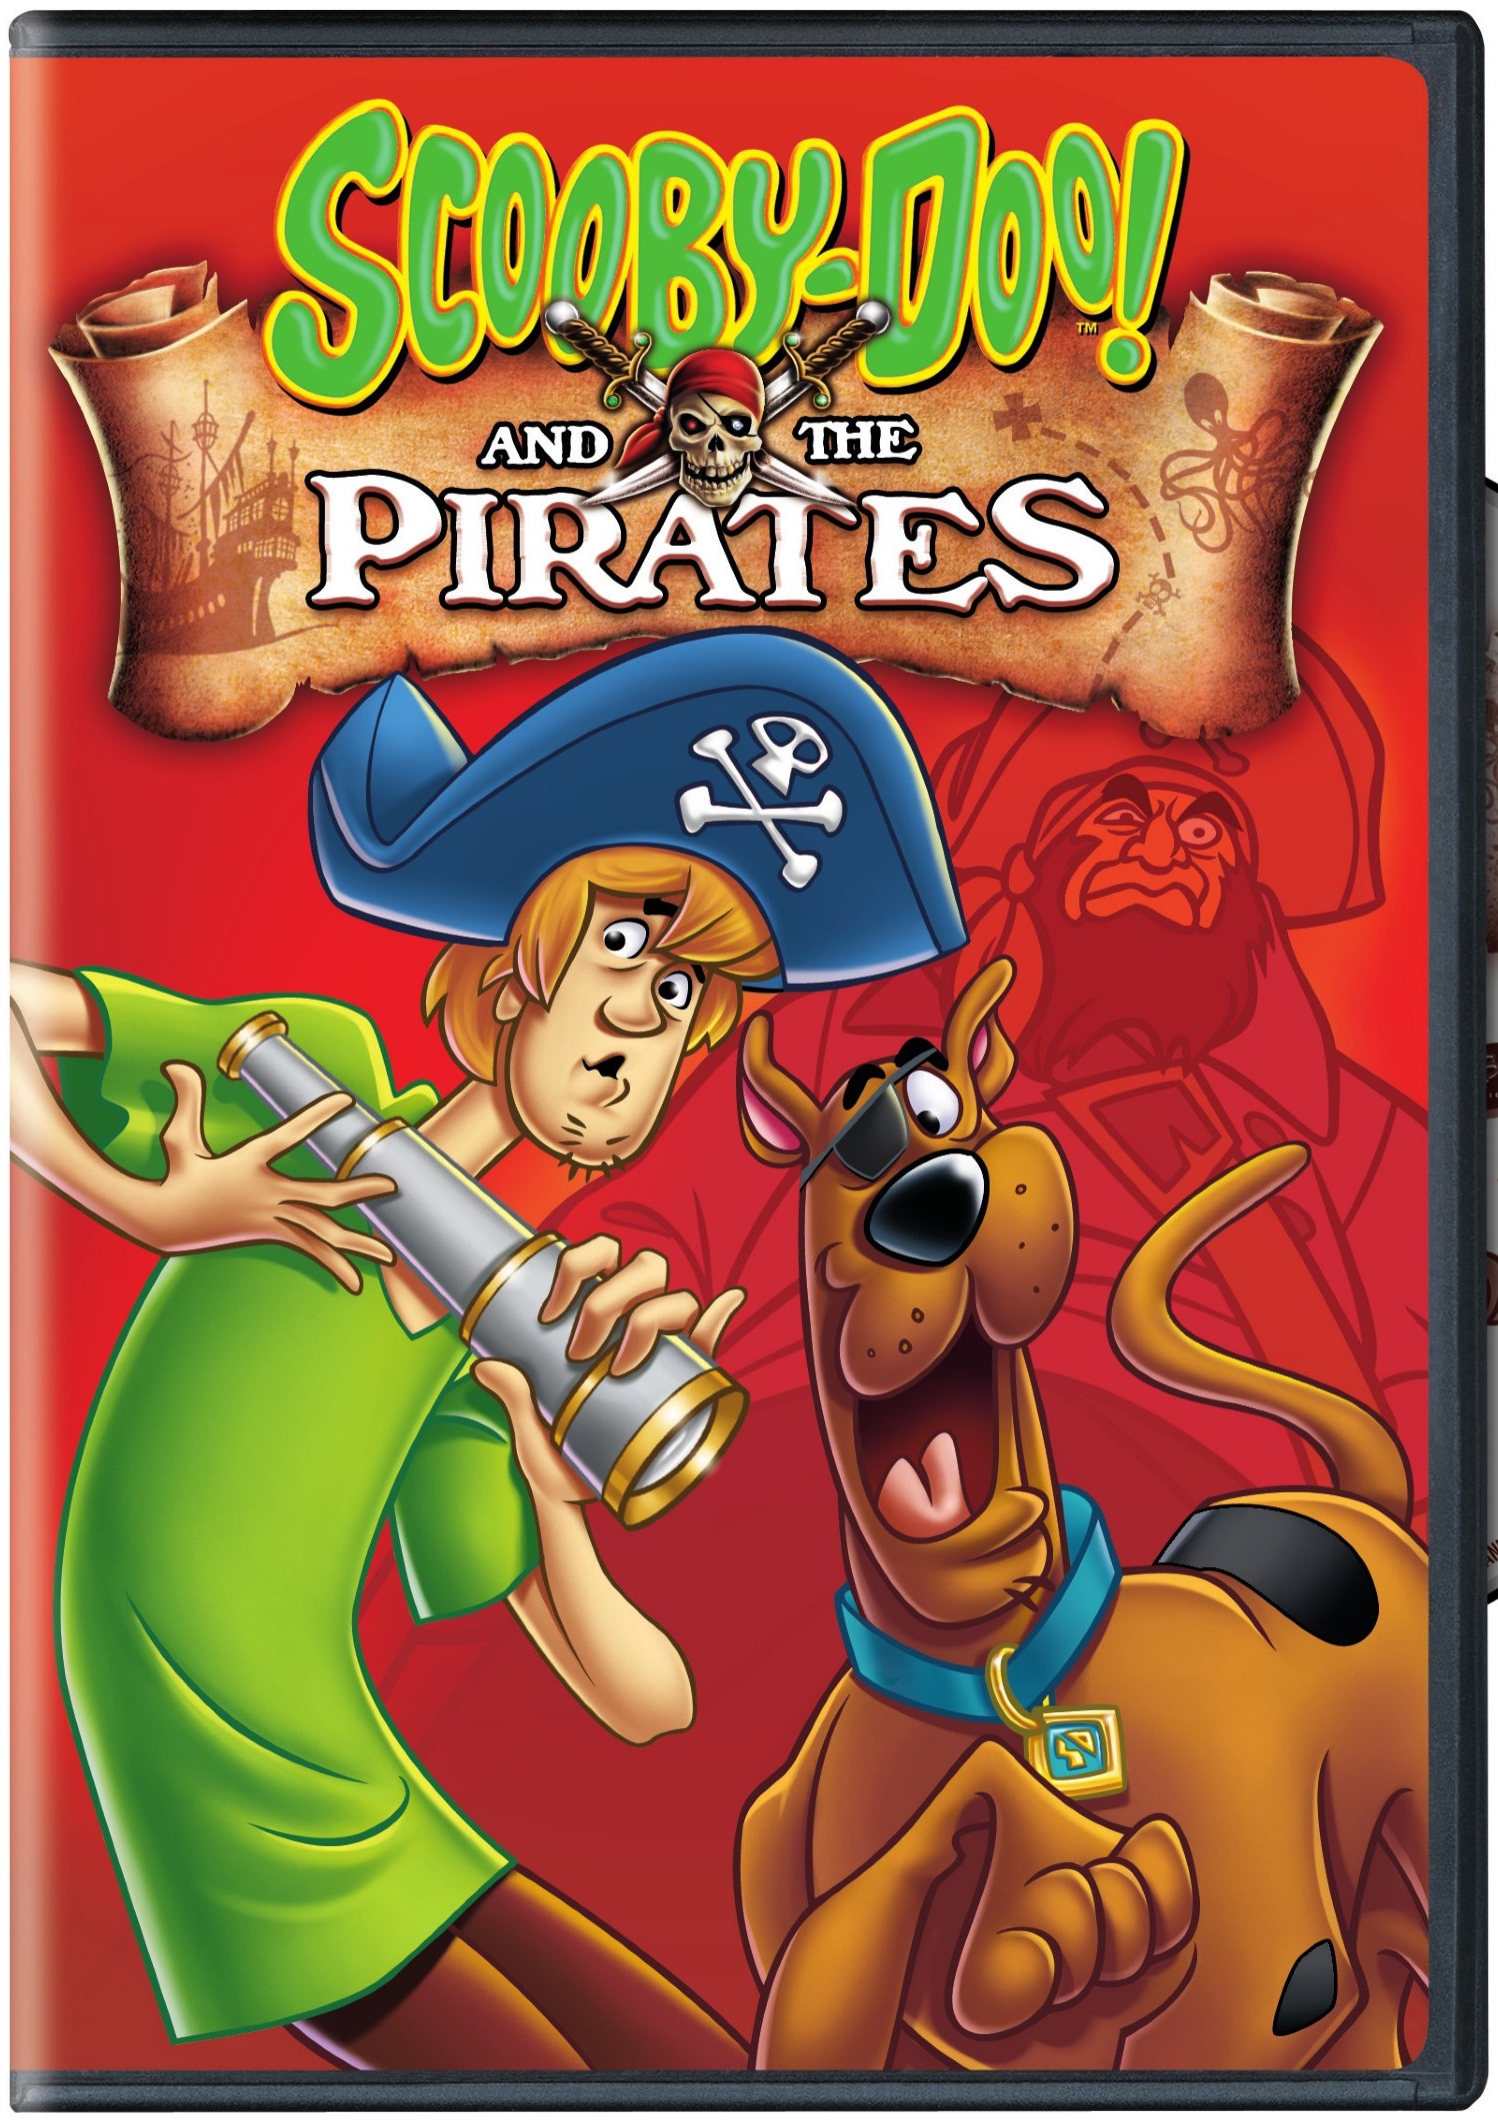 Scooby-Doo! And the Pirates (DVD), Warner Home Video, Animation - image 1 of 3